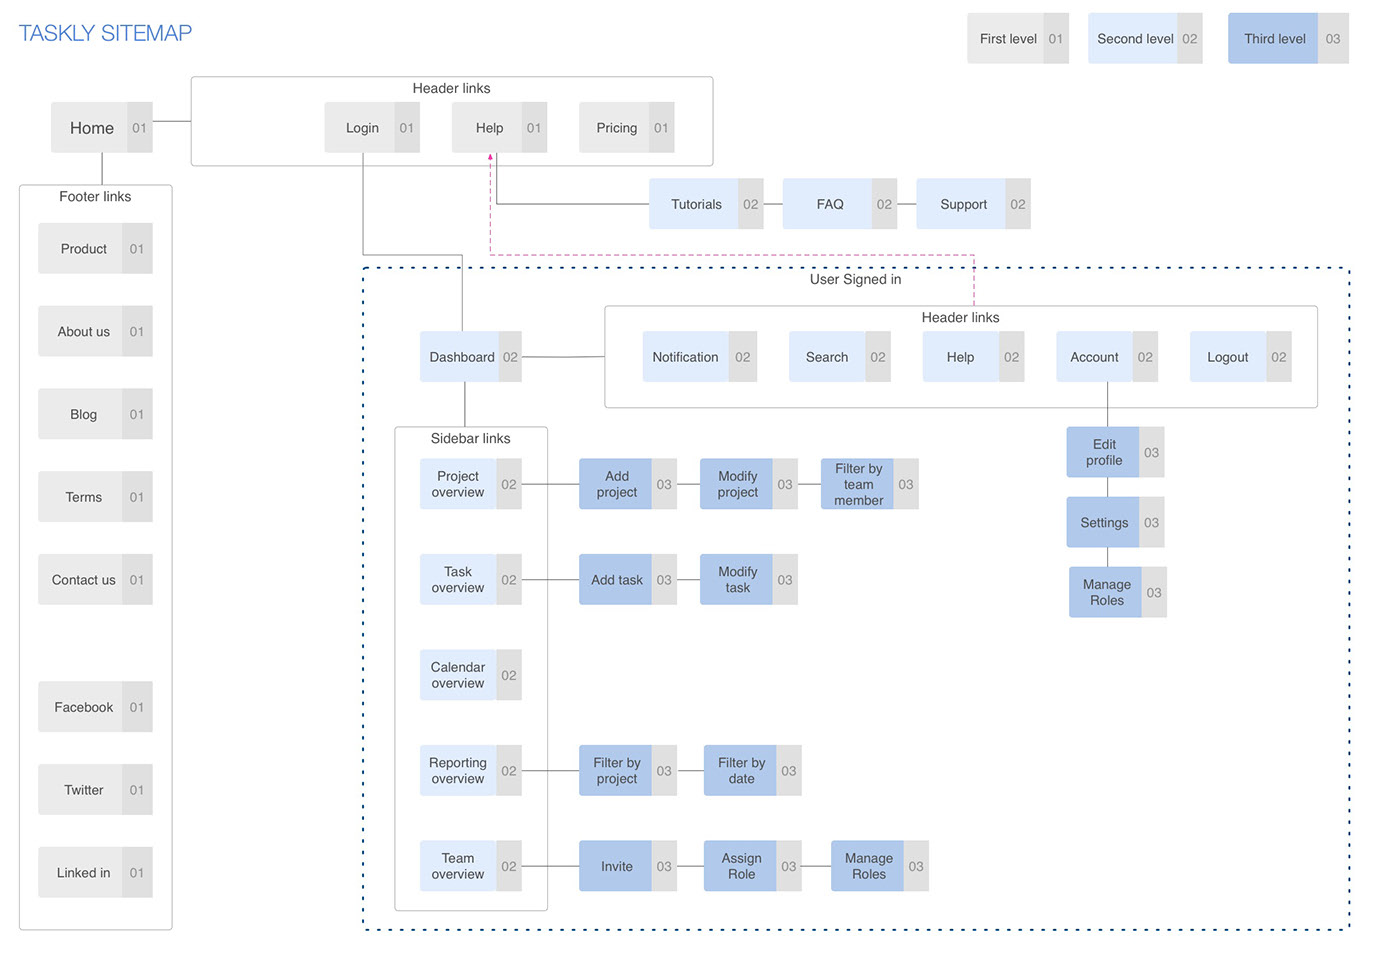 A visual sitemap for Taskly visualizes authentication scenarios for pages in the hierarchy that are not accessible to unregistered users.